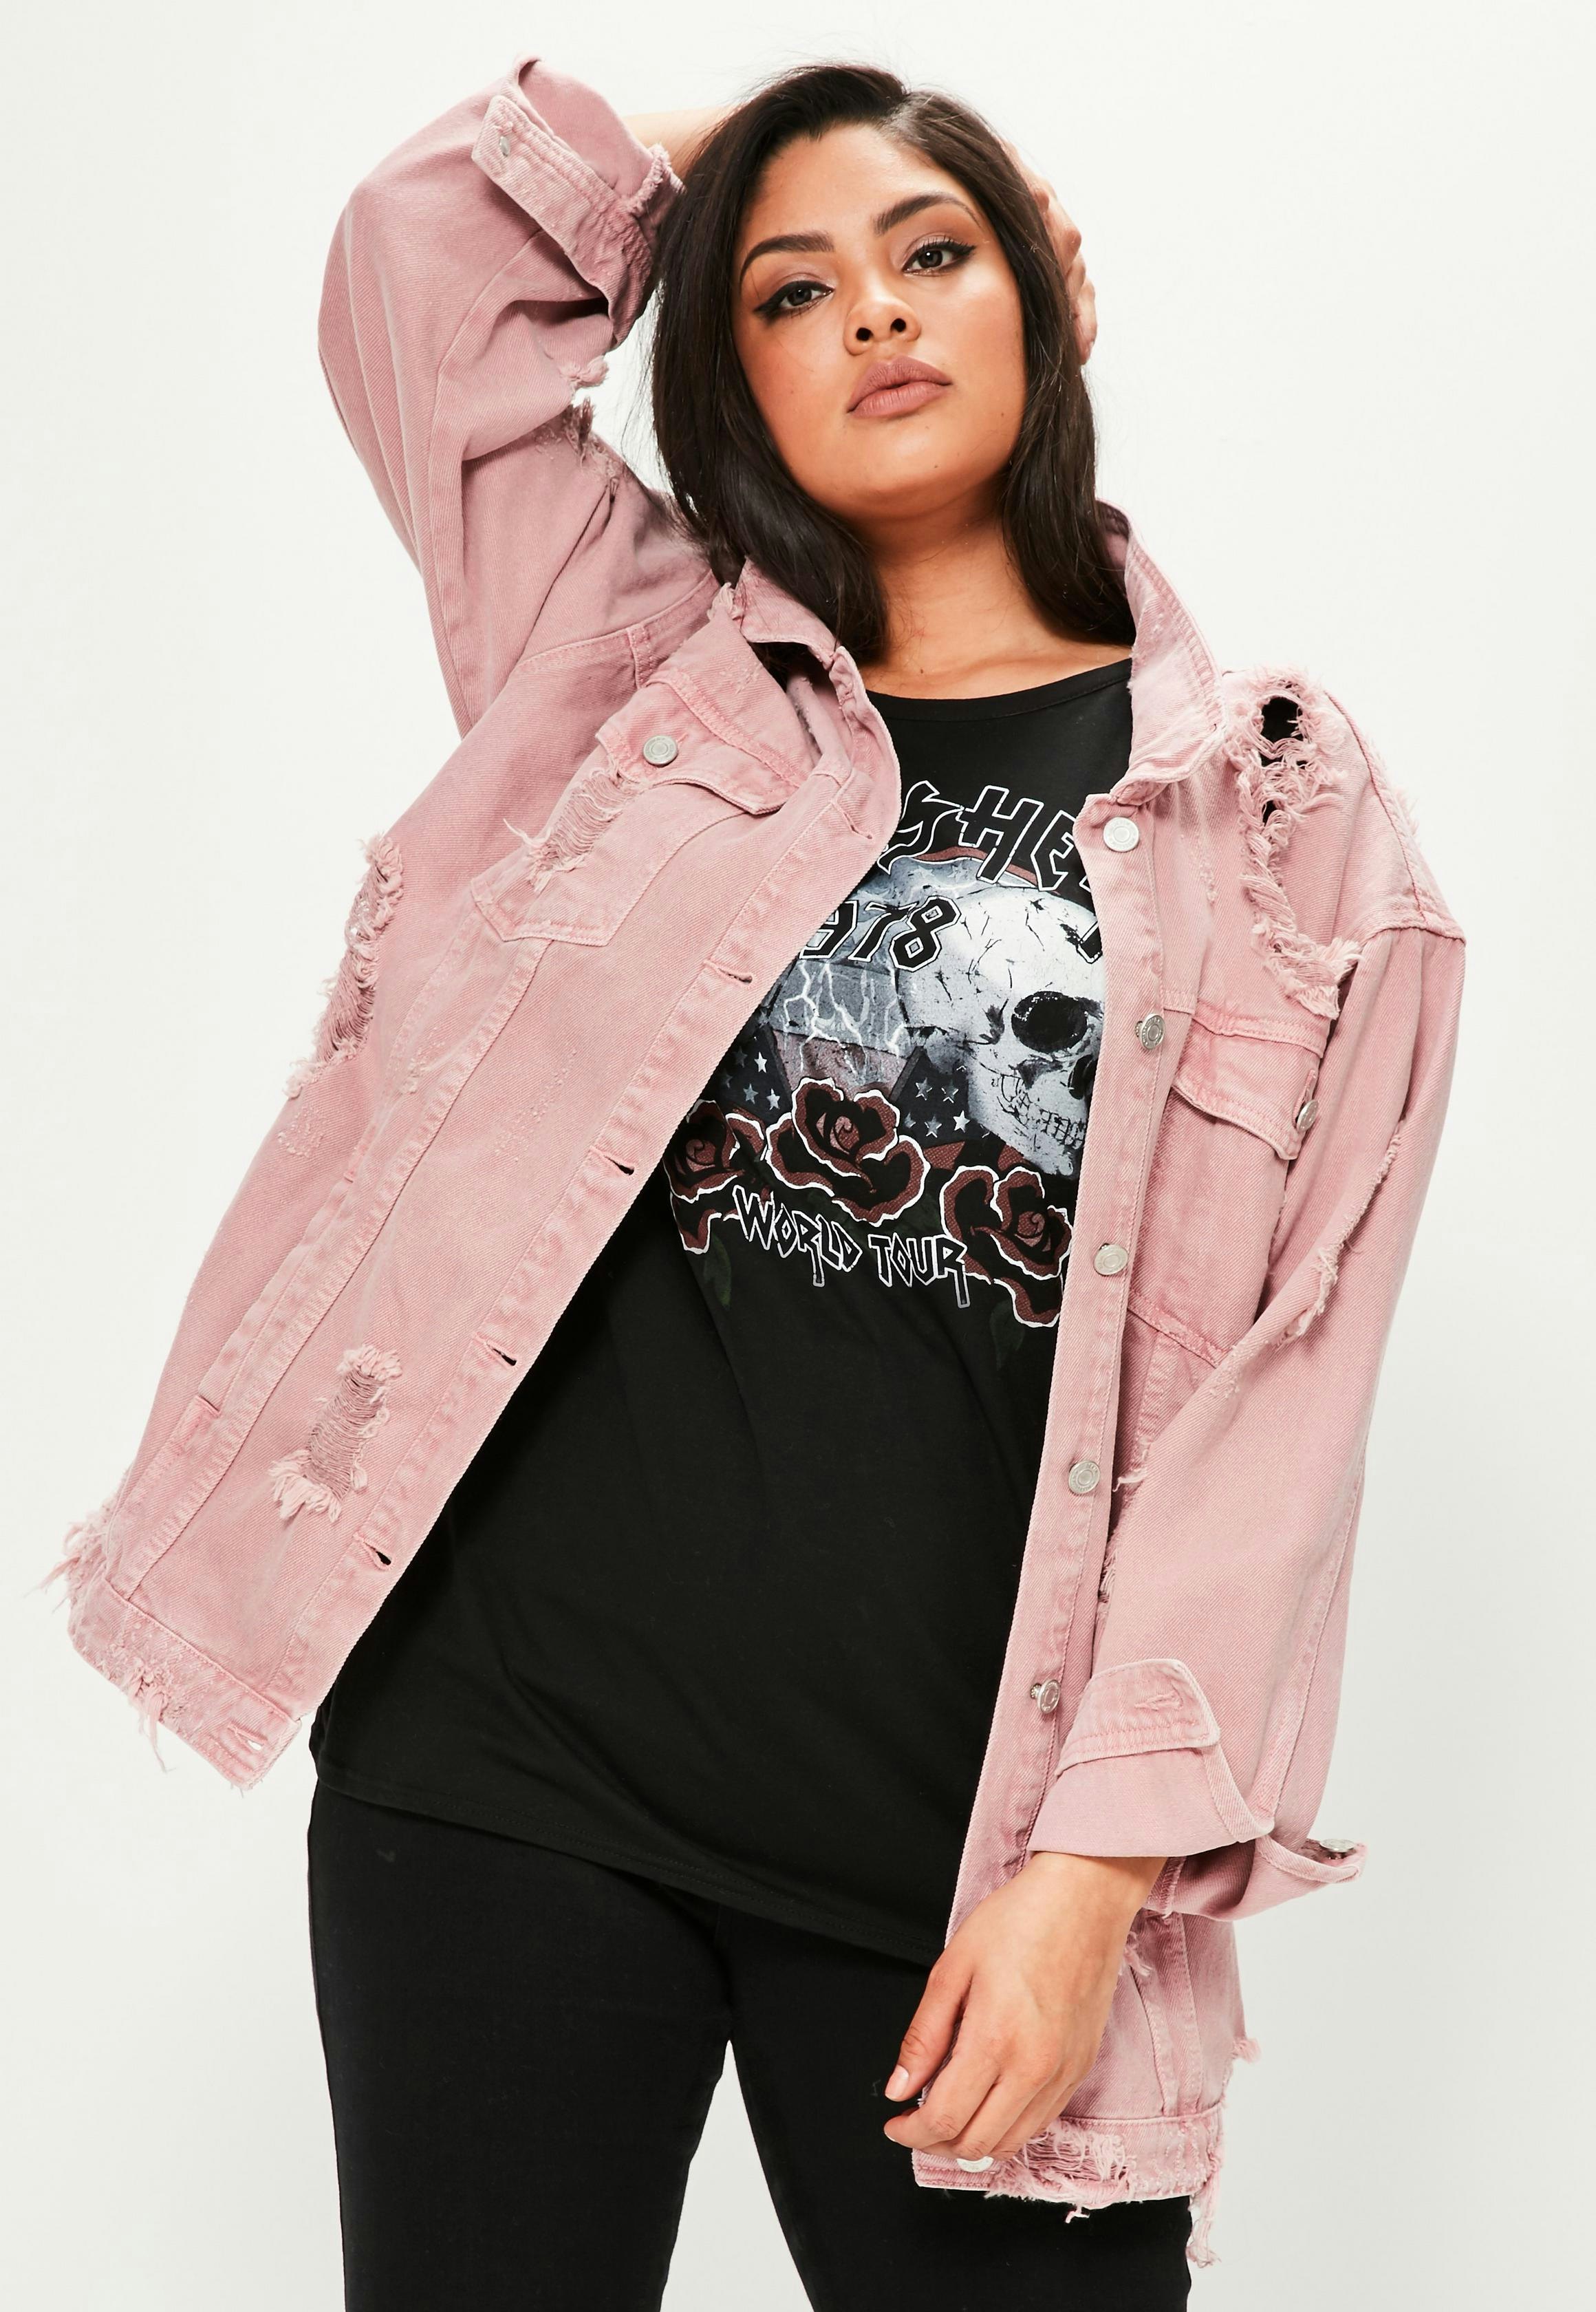 jean jacket outfits plus size